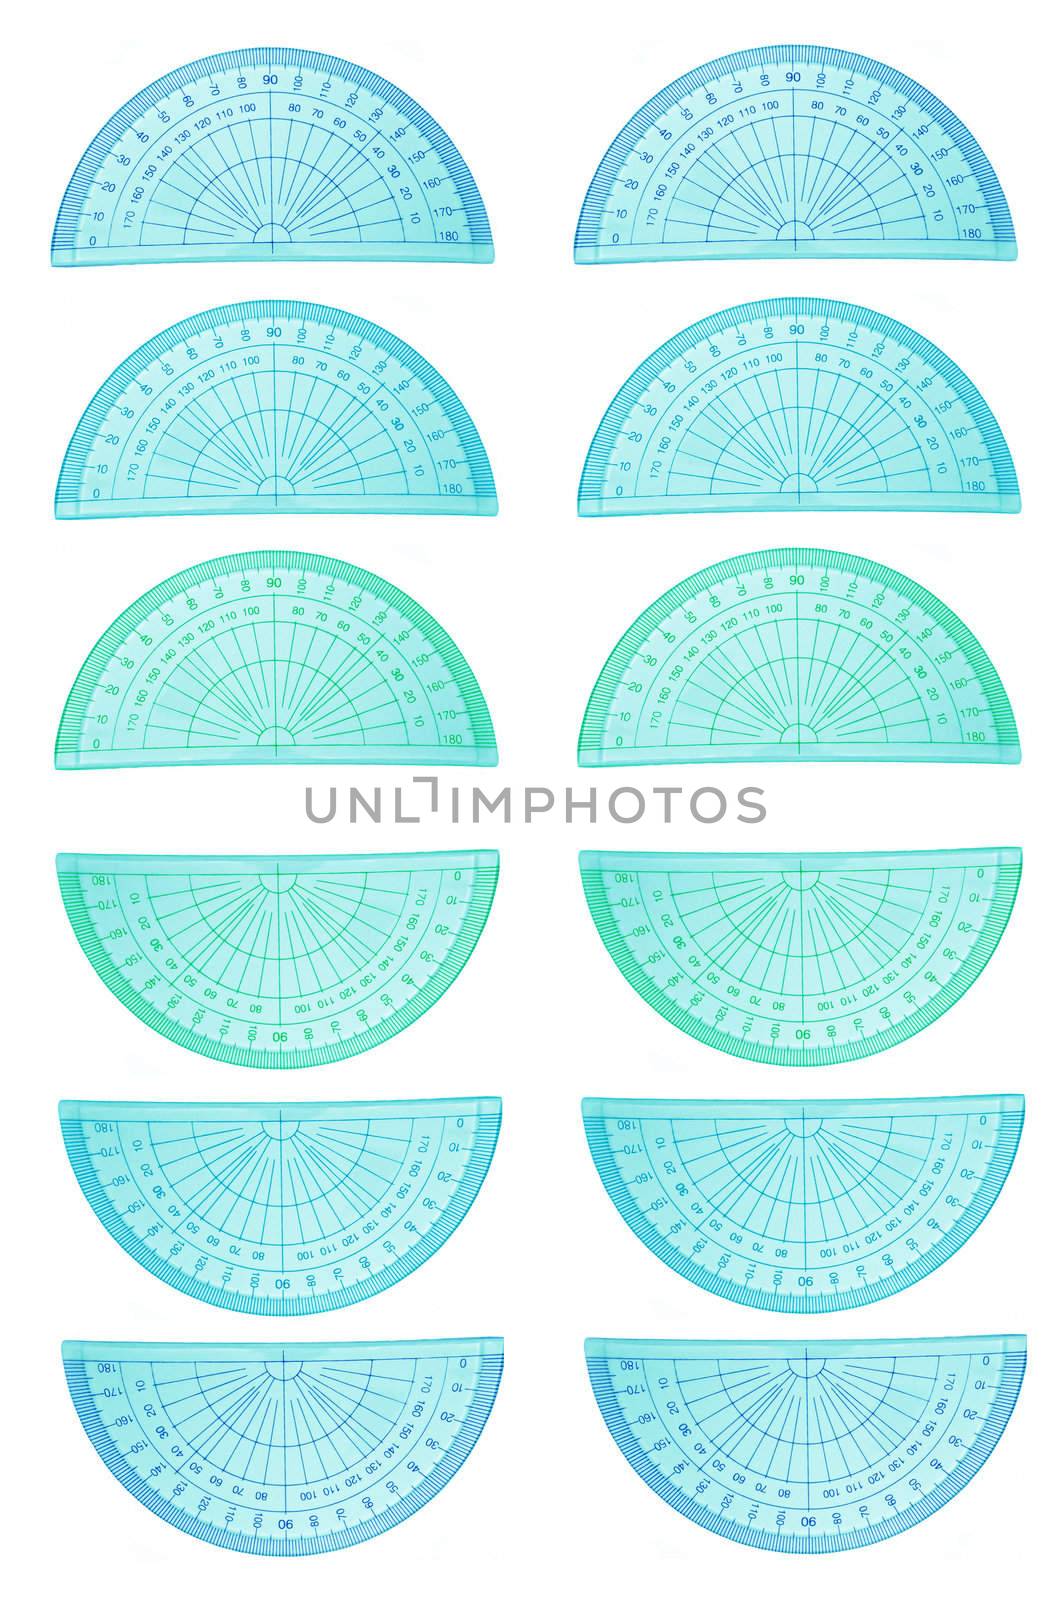 Many protractors arranged in regular pattern over white.